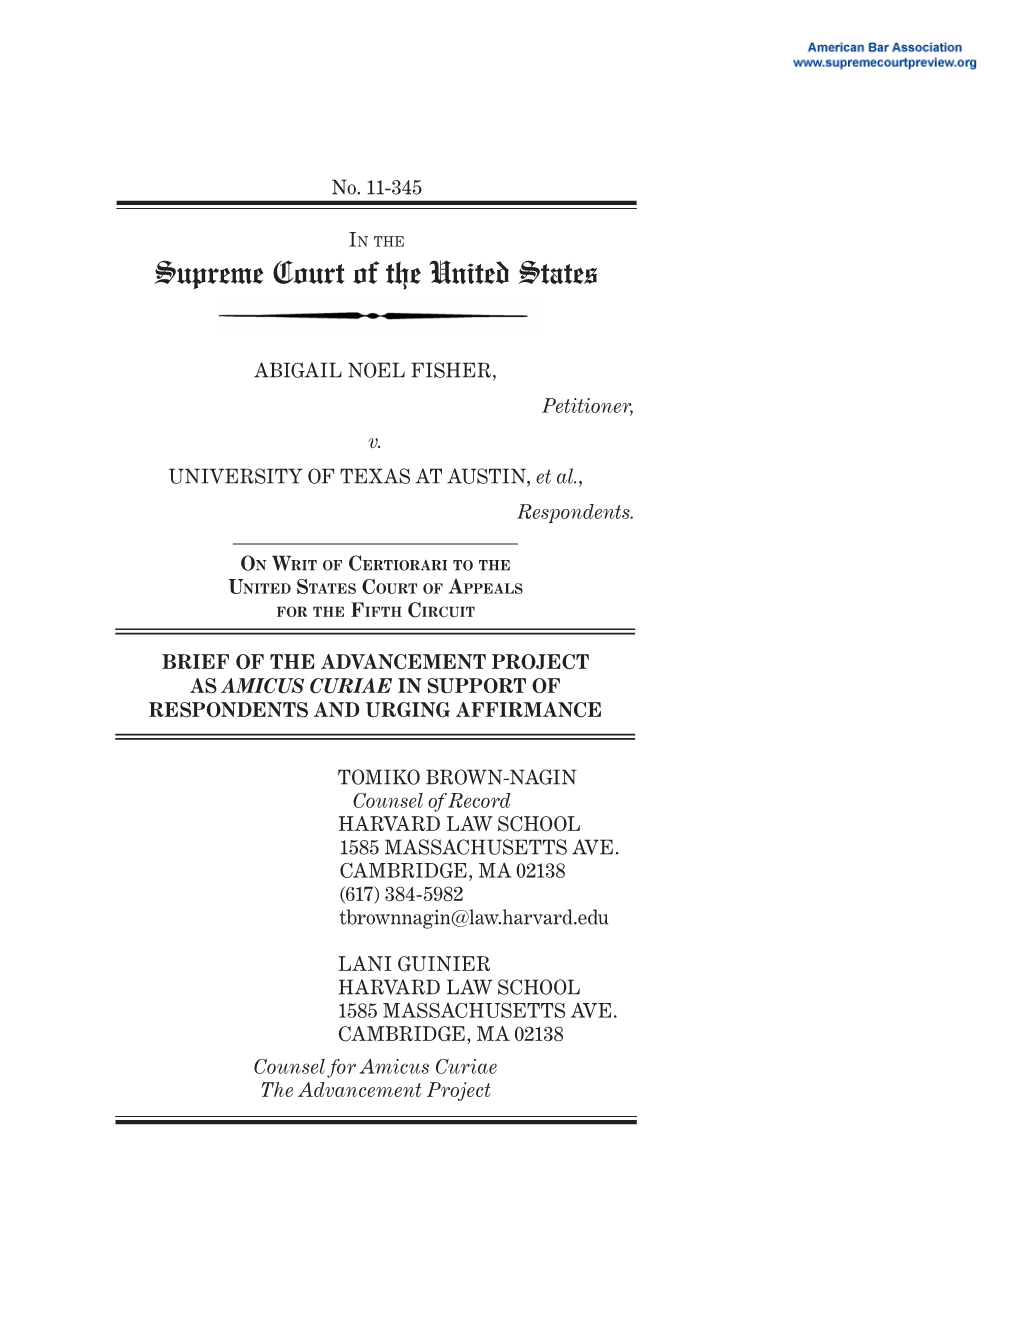 Brief on the Merits of Respondent for Fisher V. University of Texas at Austin